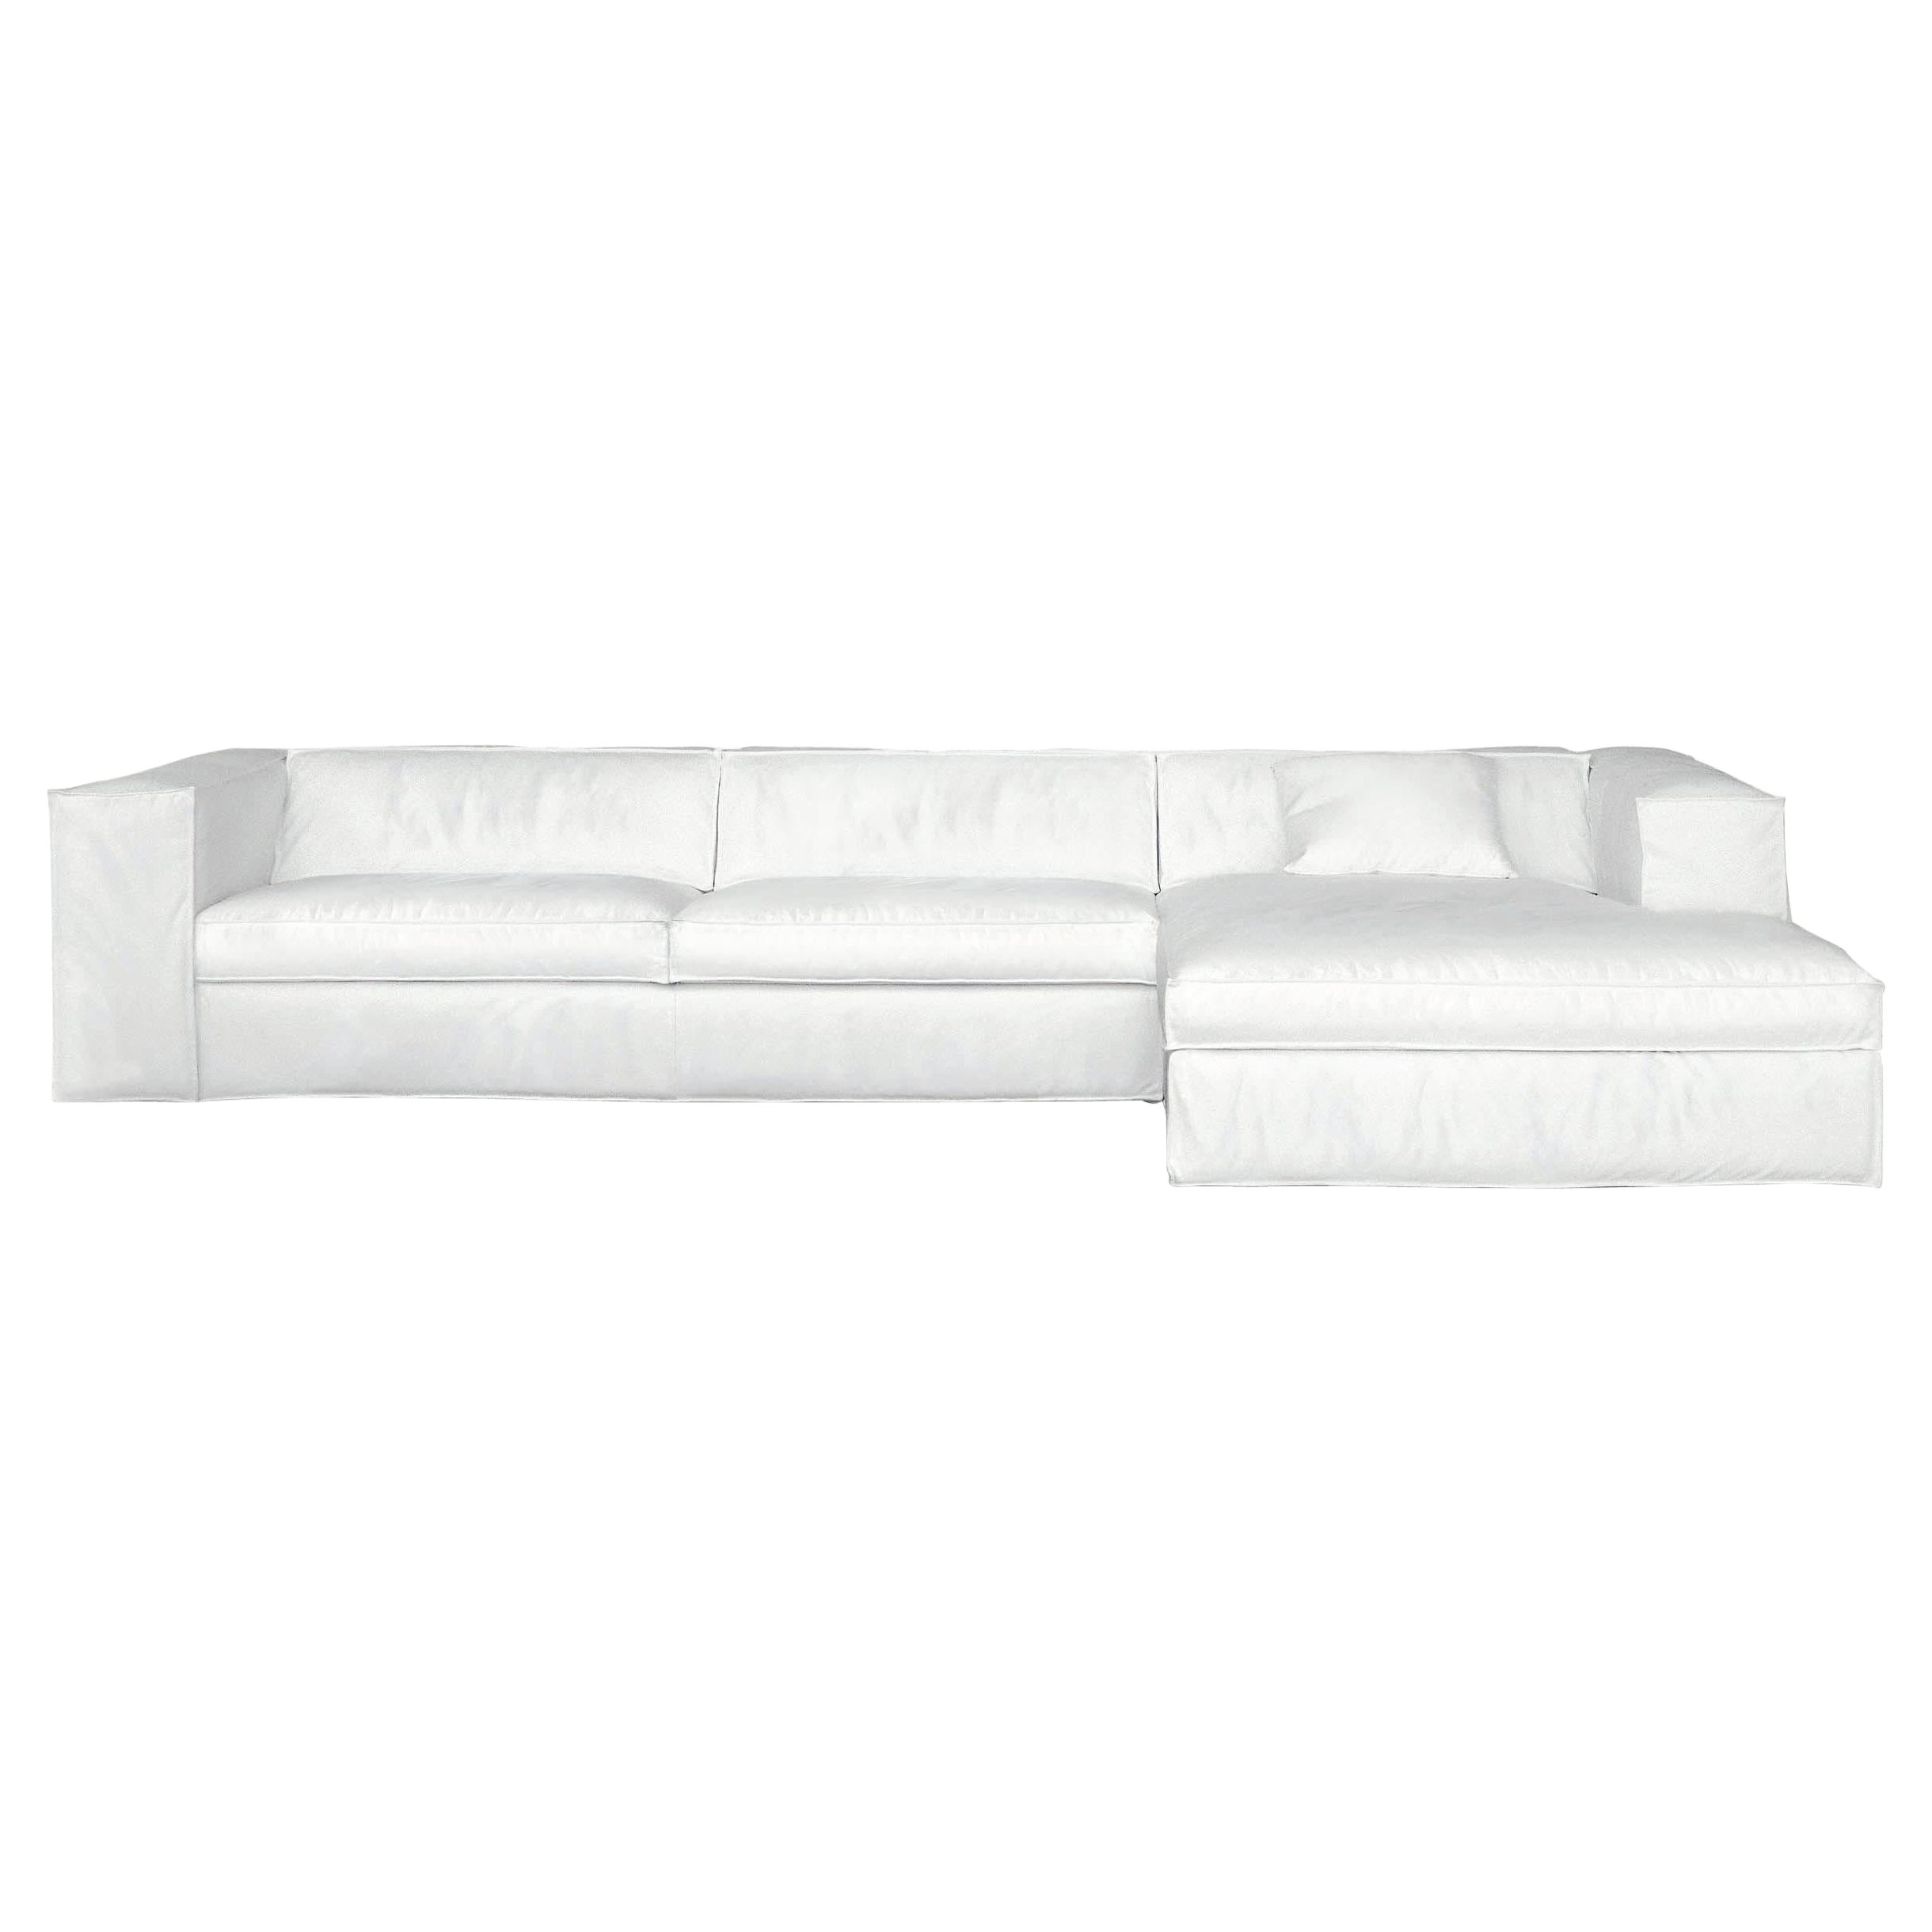 Up Extra Large Modular Sofa in Kami White Upholstery by Giuseppe Viganò